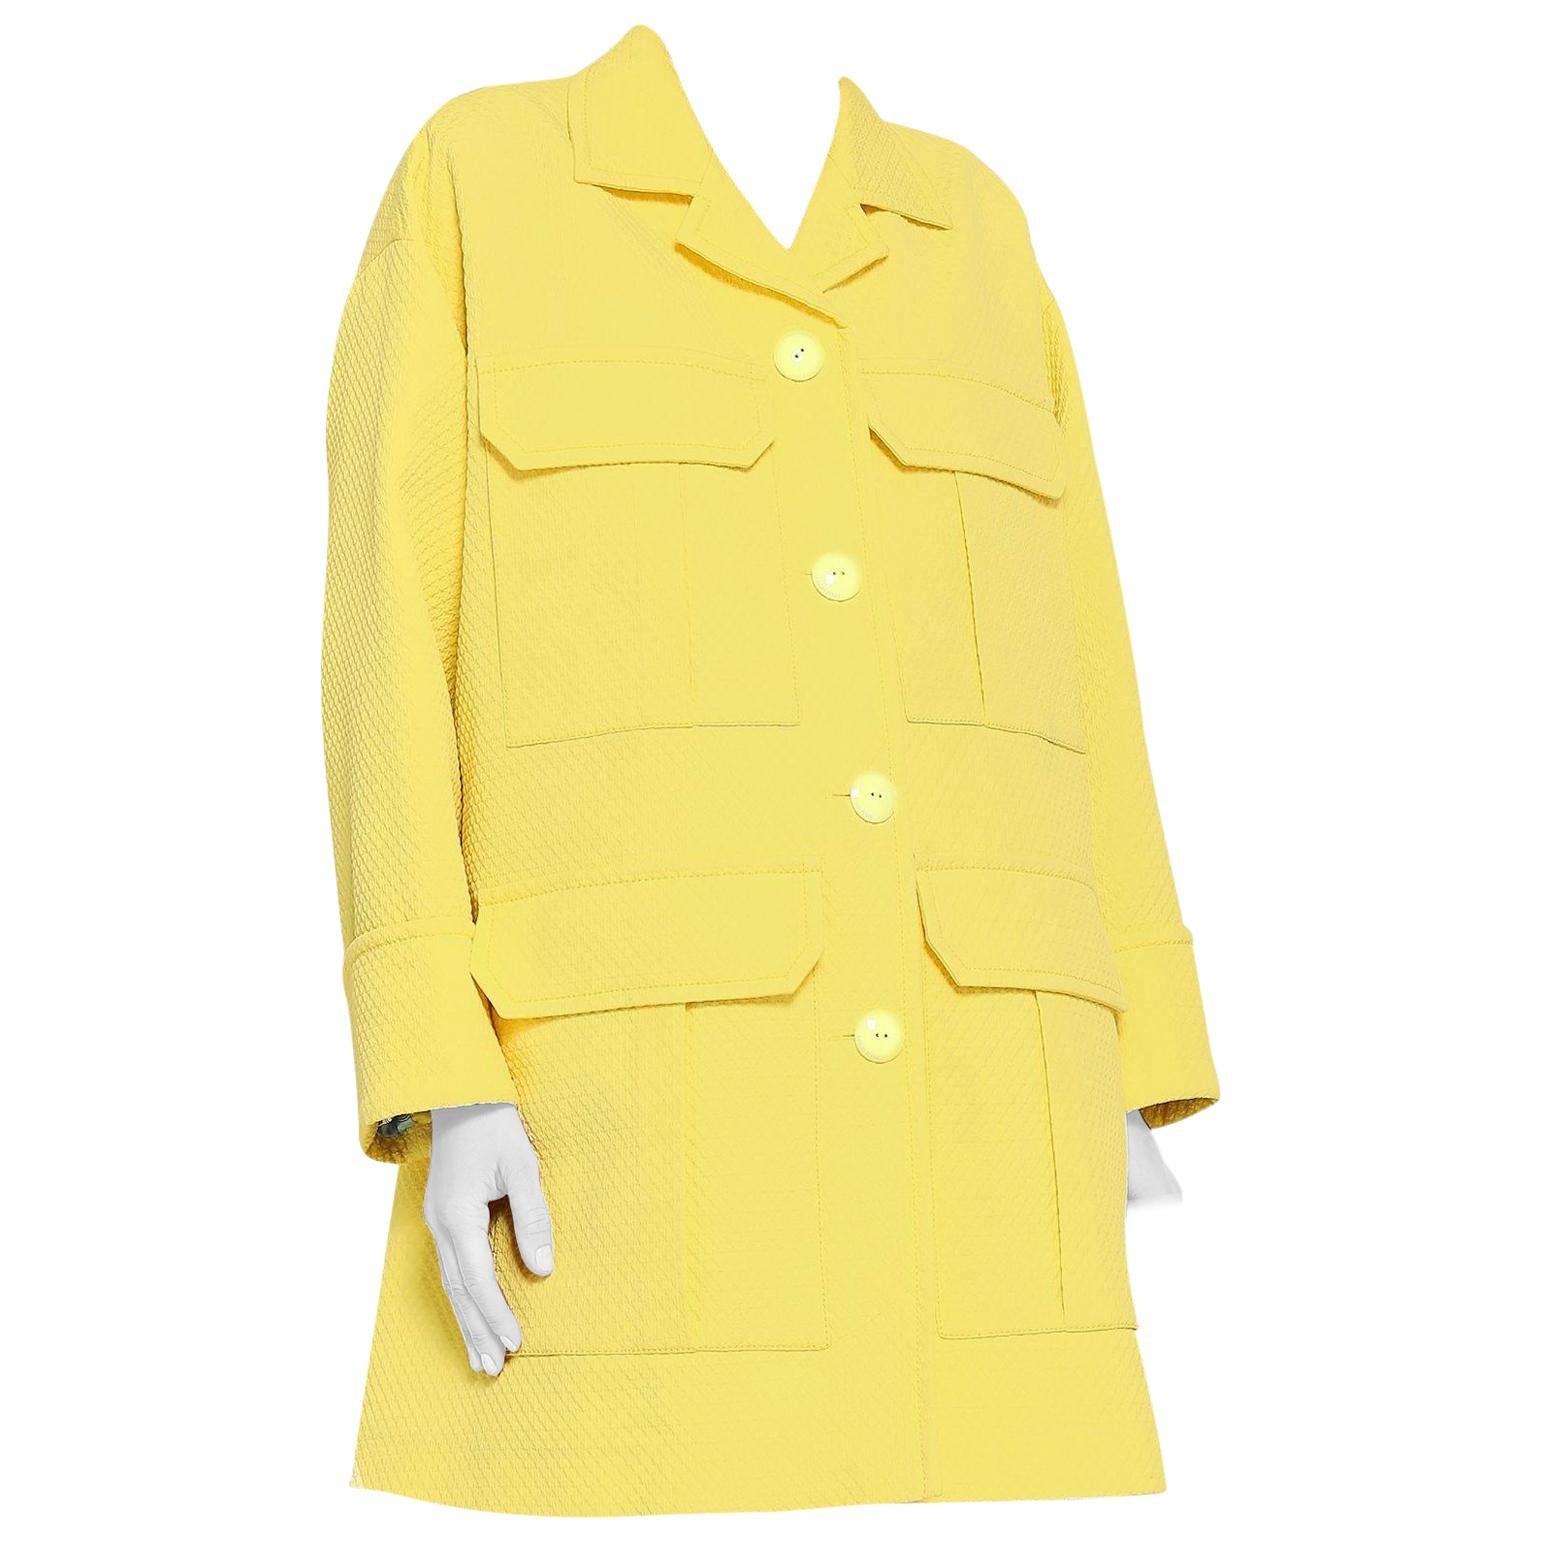 Emilio Pucci yellow matelasse oversized coat

- Canary-yellow, heavyweight matelasse
- Notch lapel, long sleeves, oversized turn-up cuffs 
- Four oversized decorative flap pockets
- Centre-front button fastening, yellow lacquered metal buttons, grey